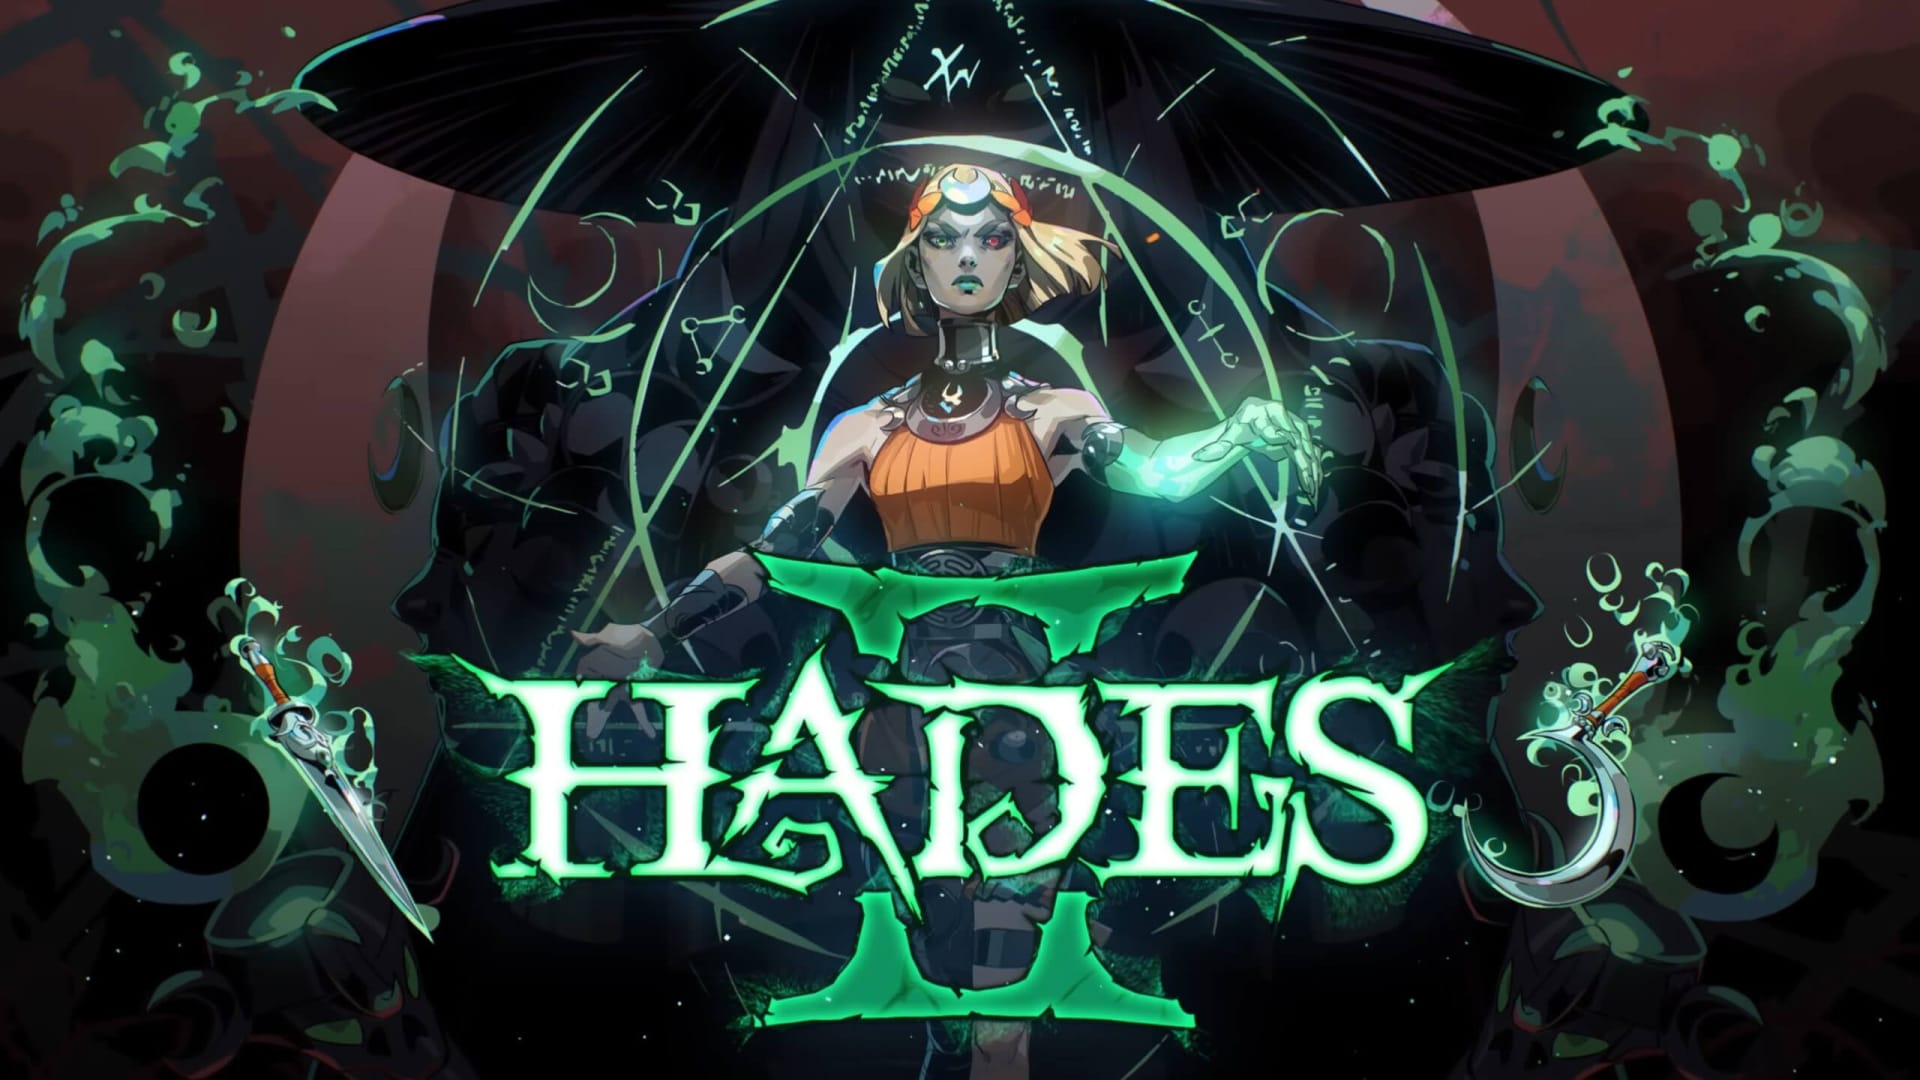 Official artwork for Hades 2 depicting its protagonist and the game's logo